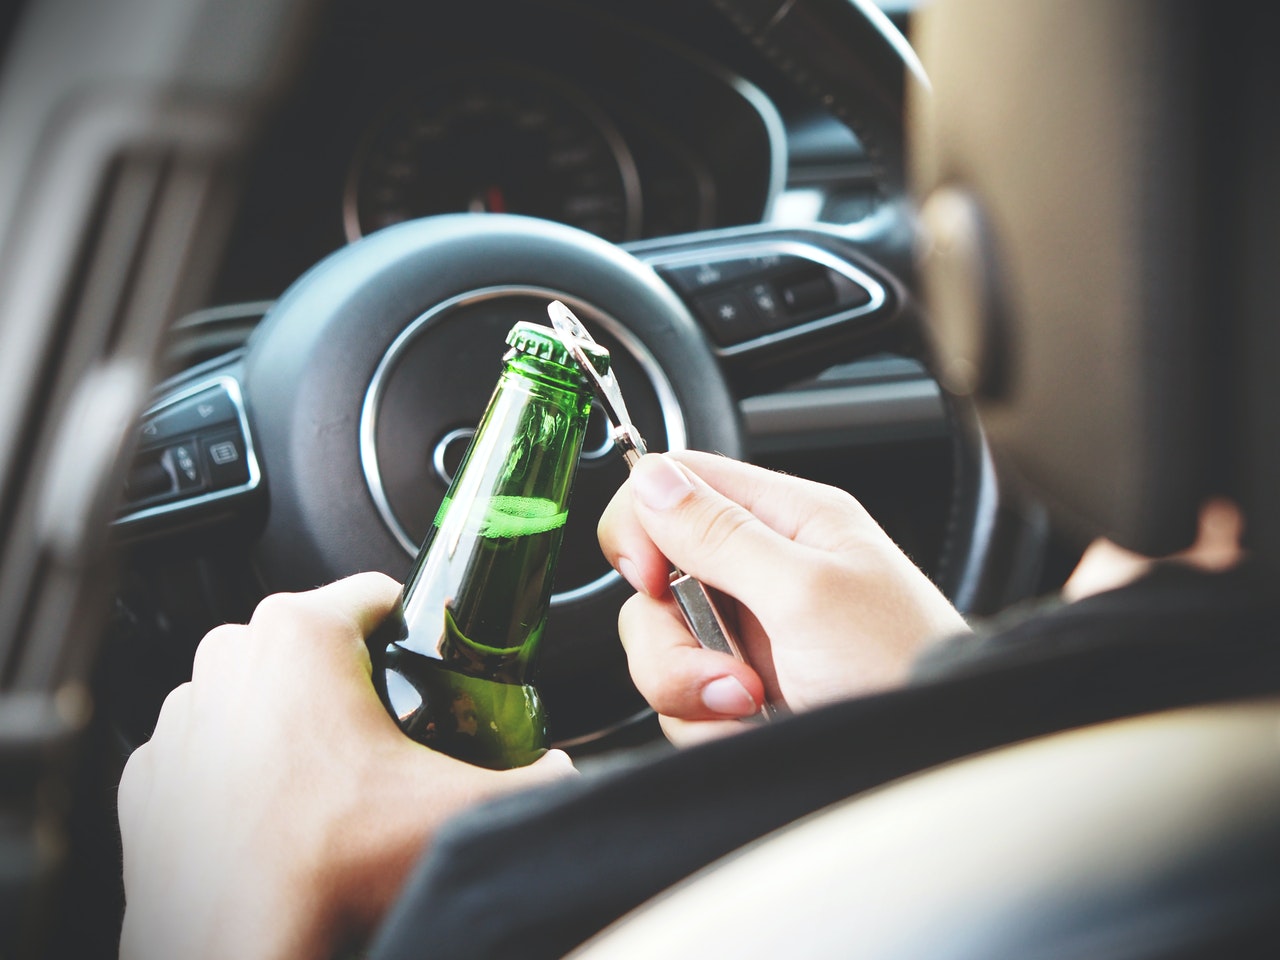 Alcohol Detection Systems in U.S. Vehicles